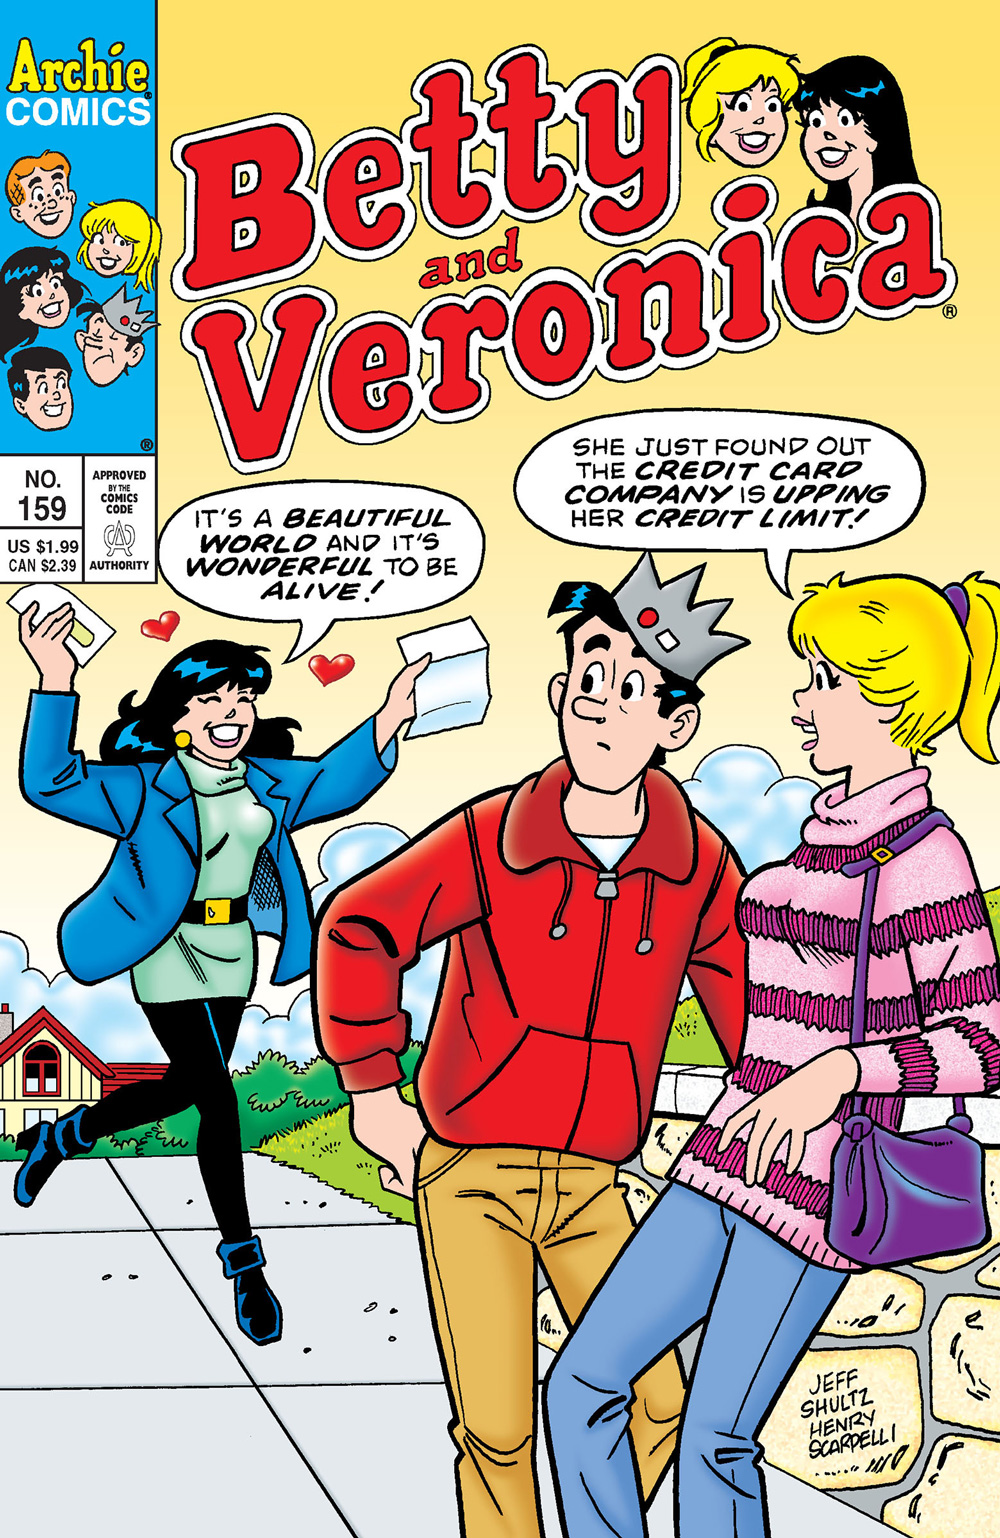 Veronica runs up to Betty and Jughead saying it's a beautiful world and it's wonderful to be alive, holding a letter she just got in the mail. Betty says she just found out her credit card limit was increased.